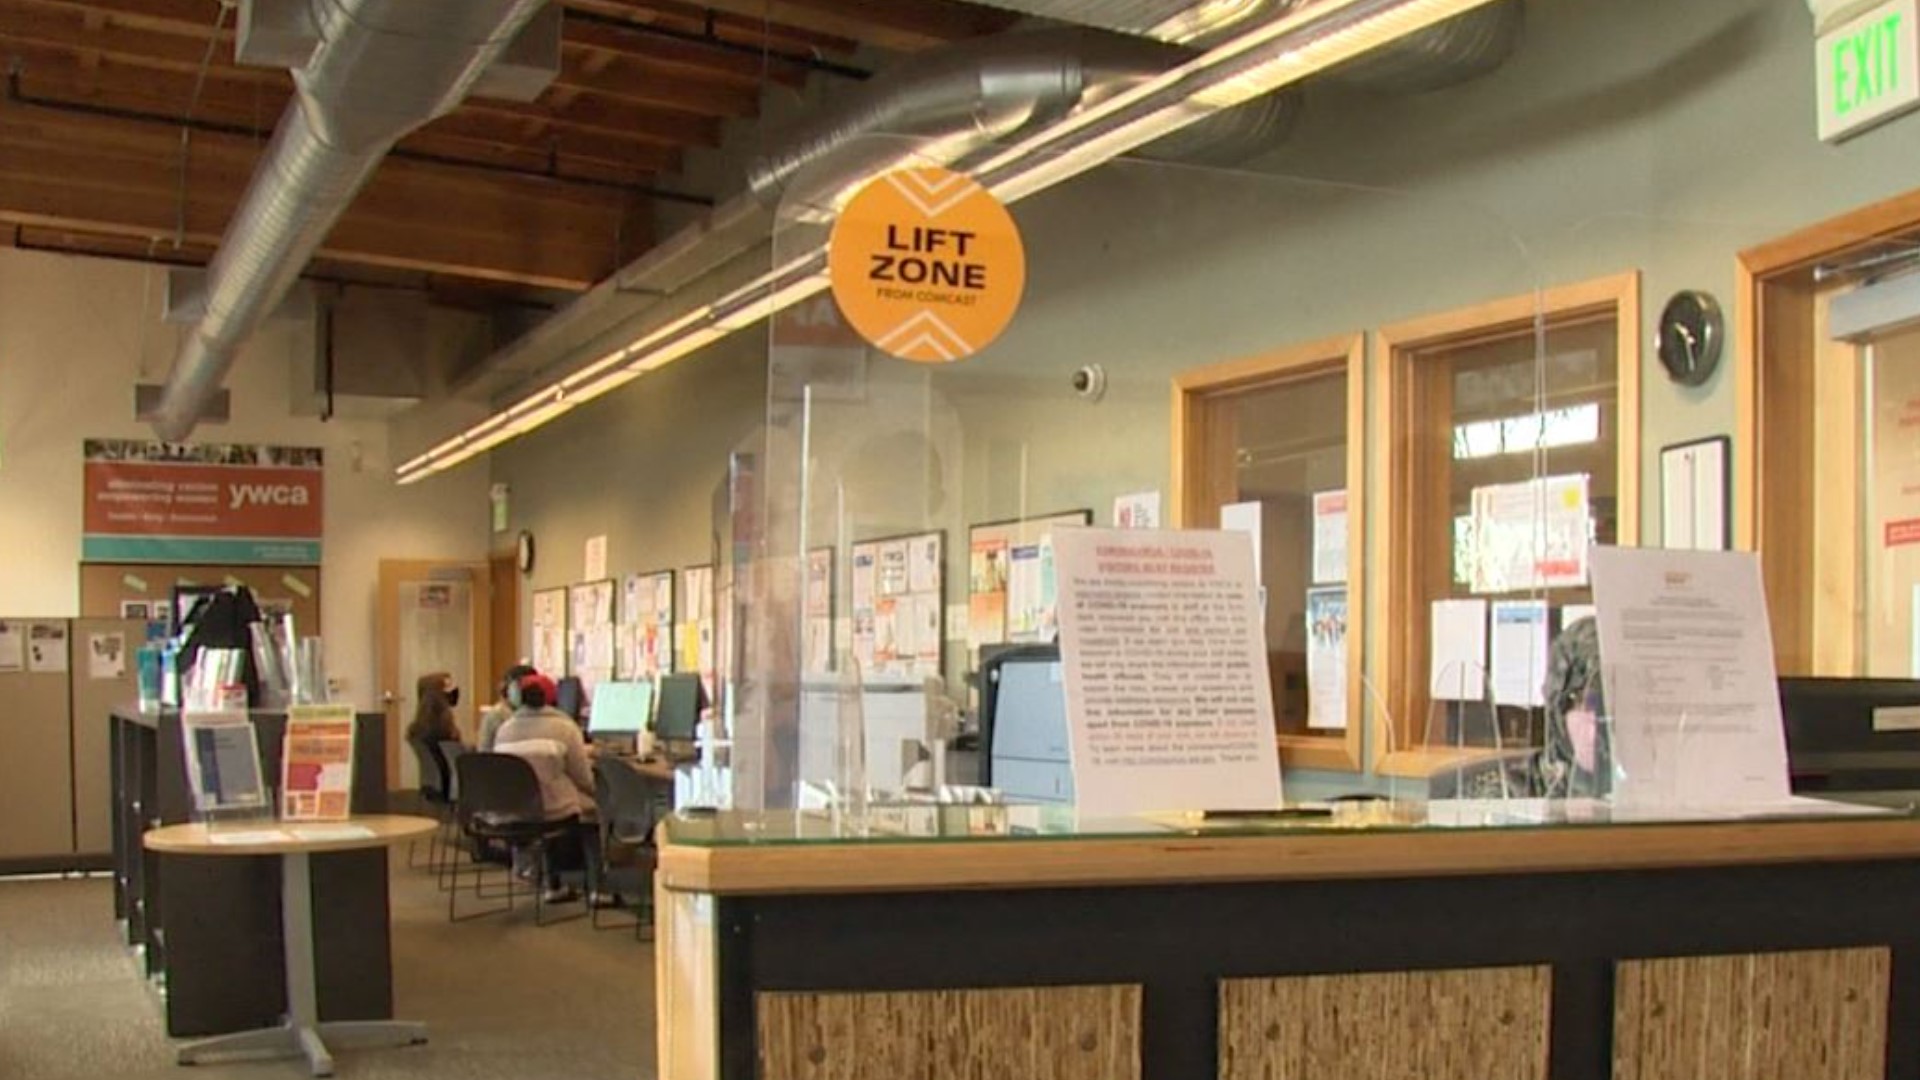 The all-new "Lift Zones" provide free robust wifi and digital resources in community spaces. #k5evening